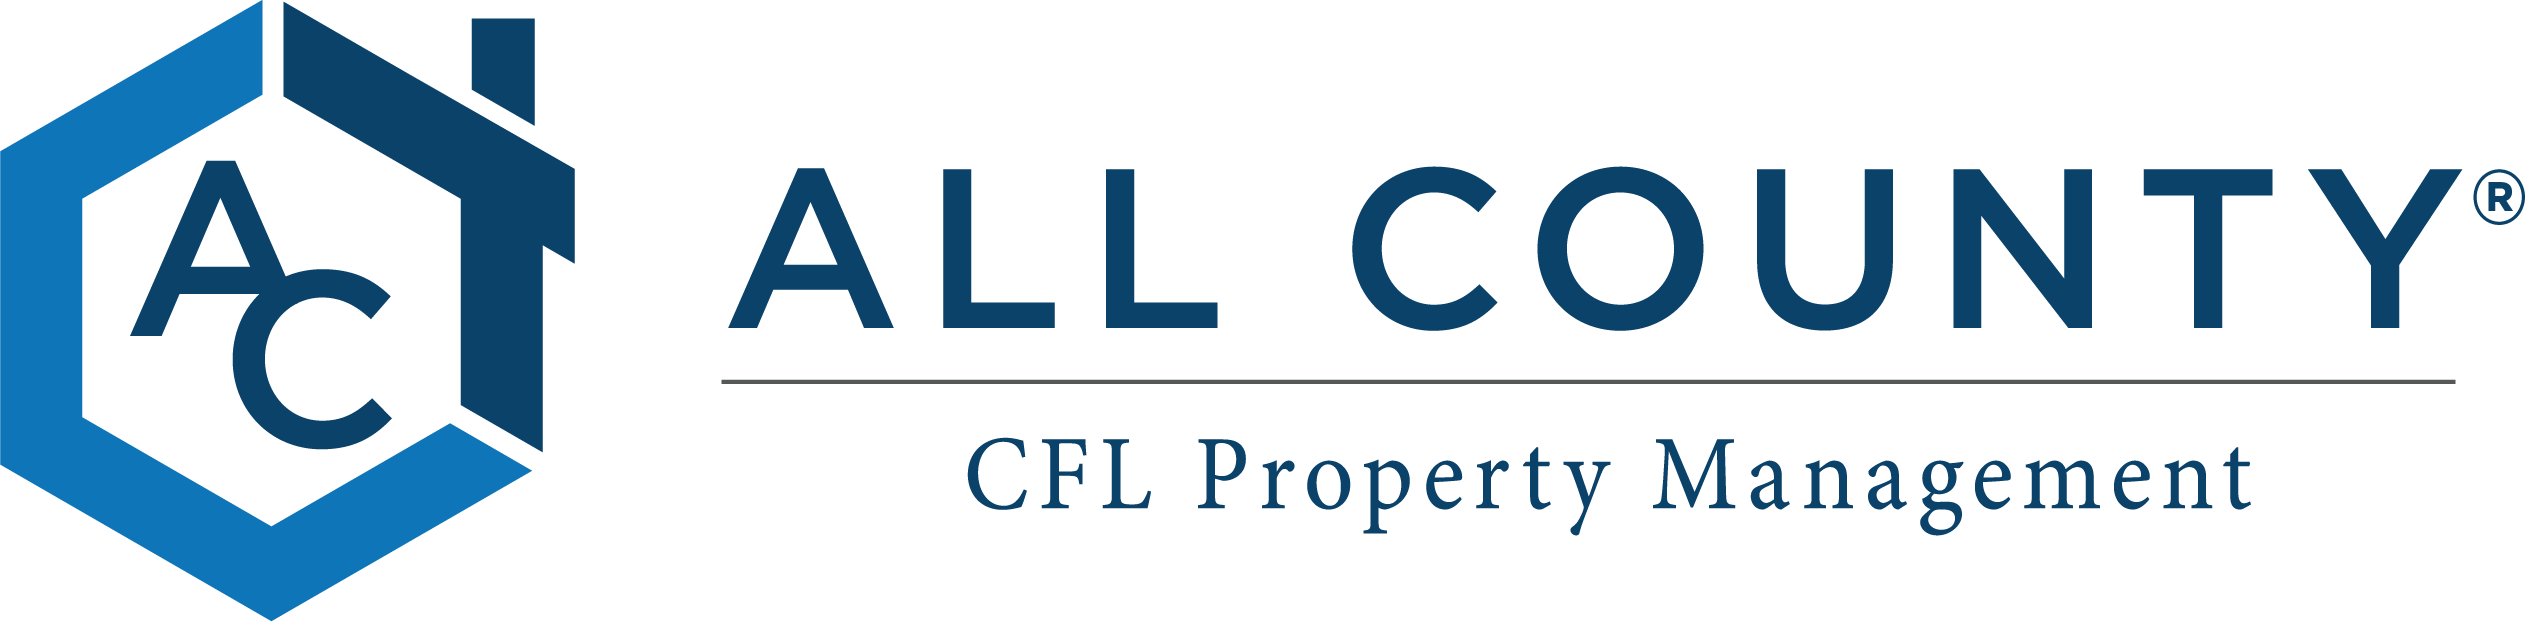 All County CFL Property Management